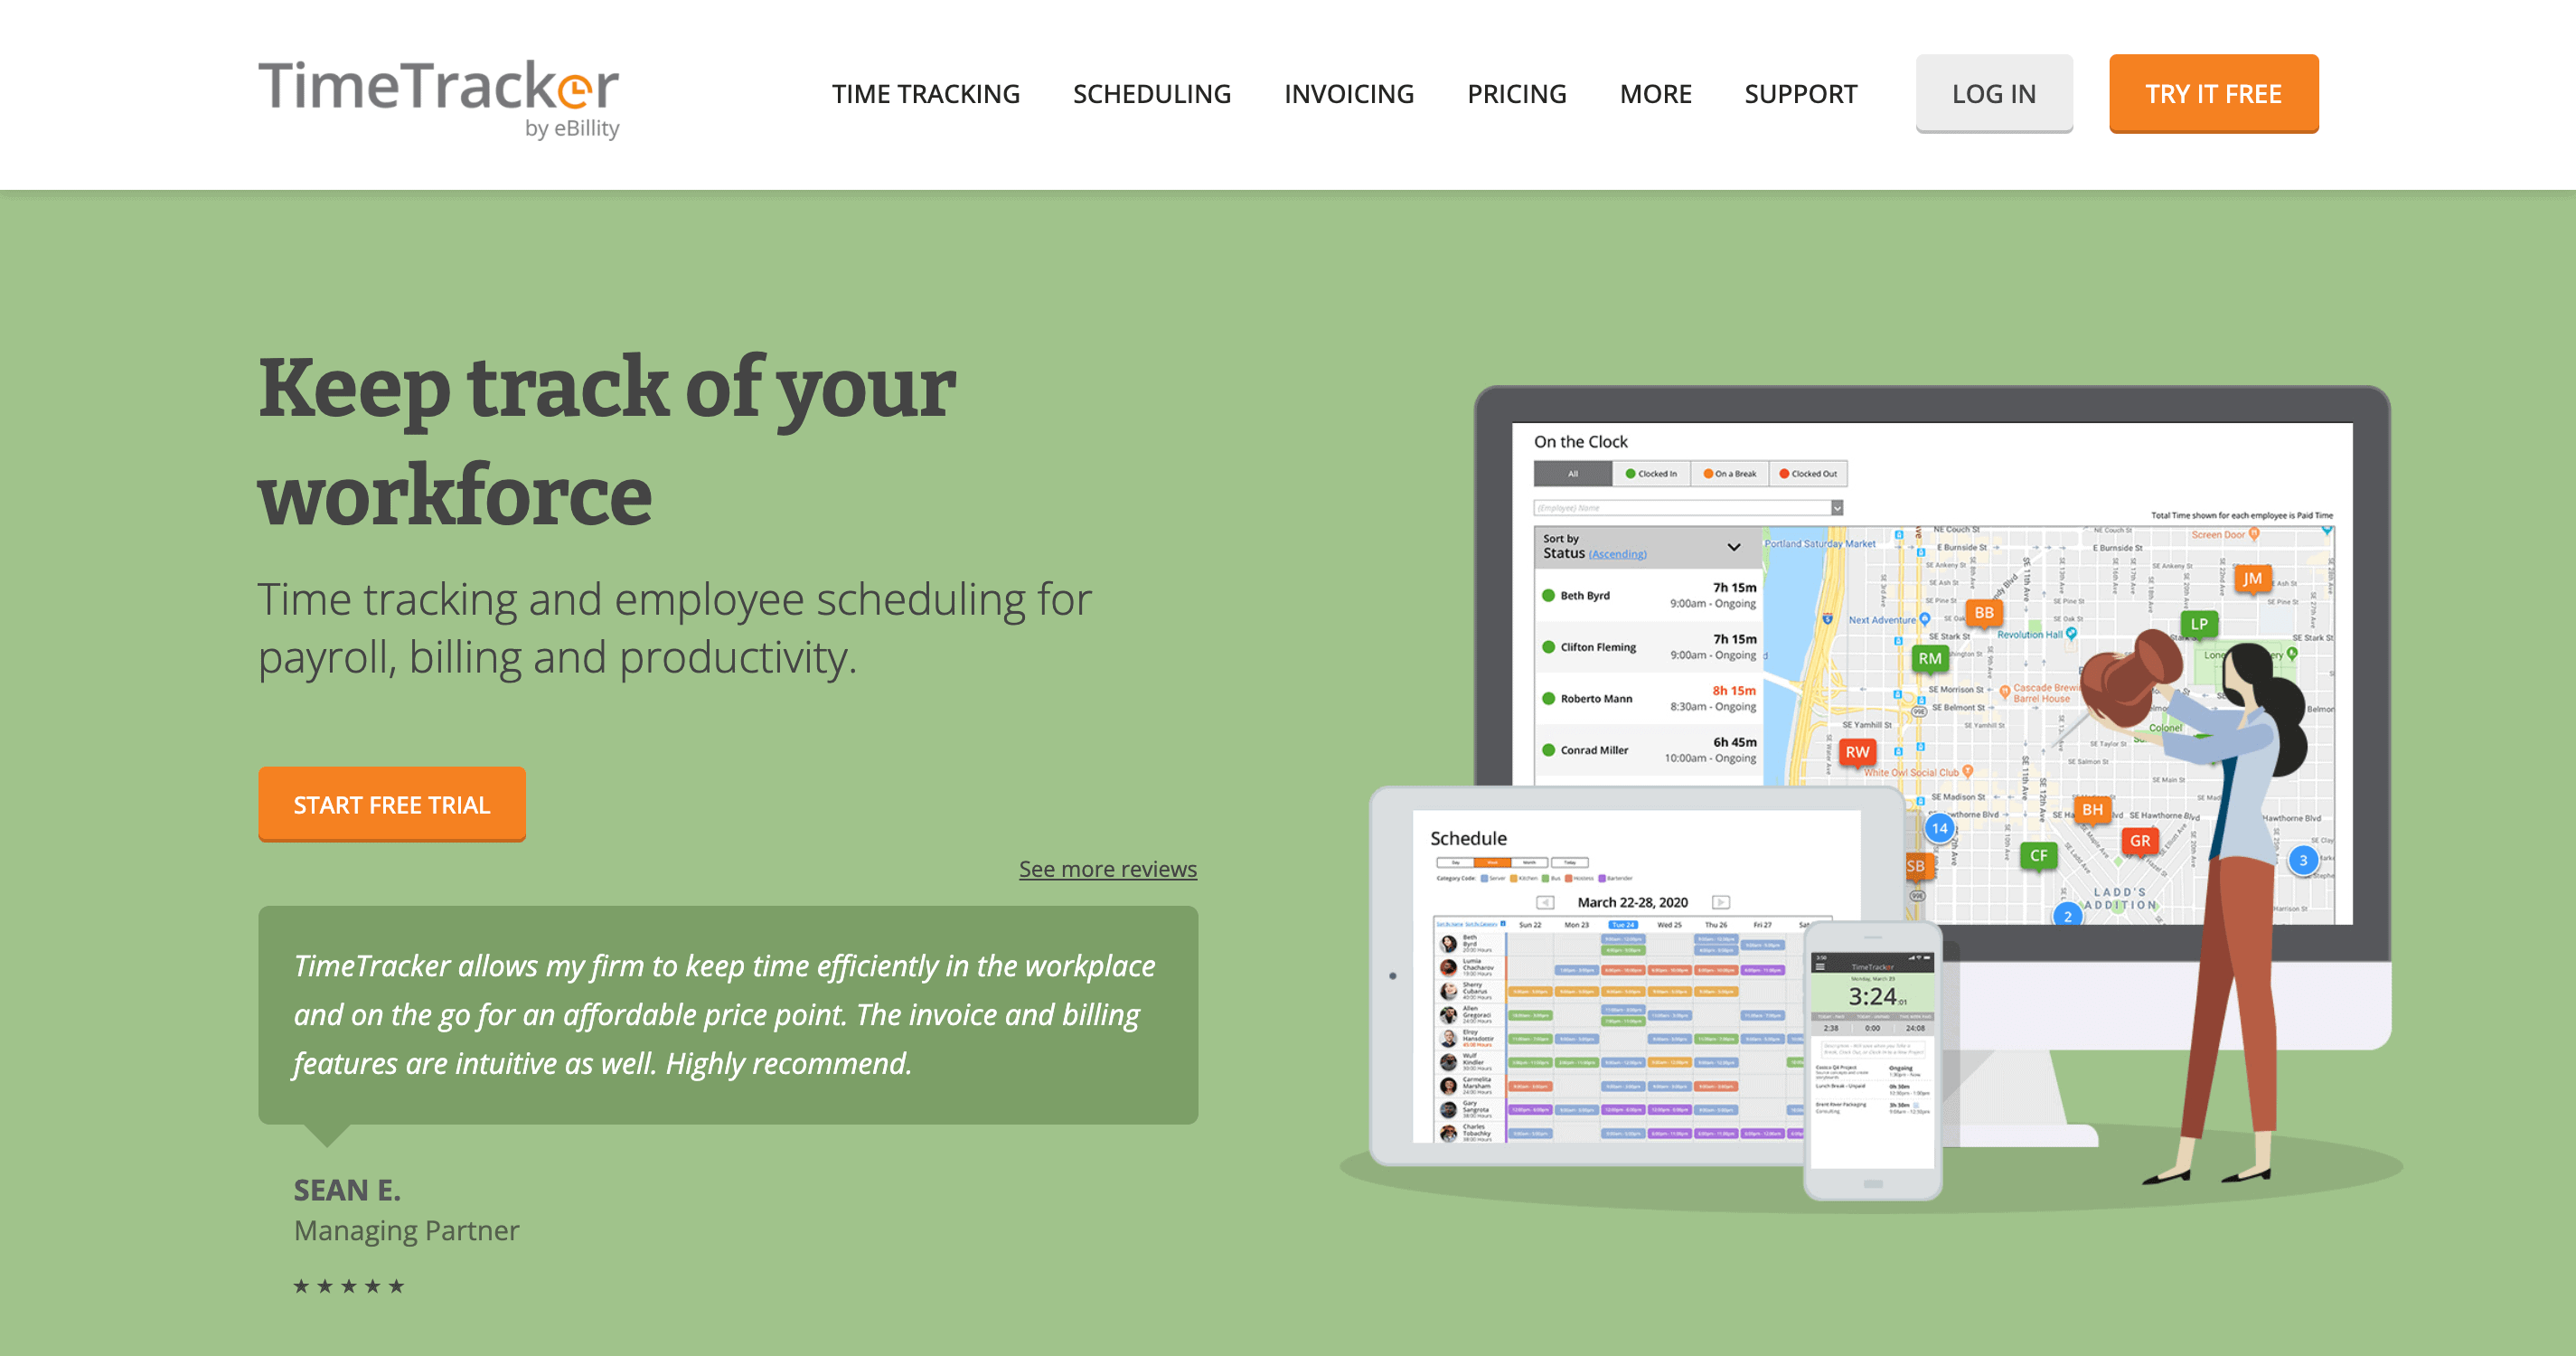 Time Tracker by eBillity homepage